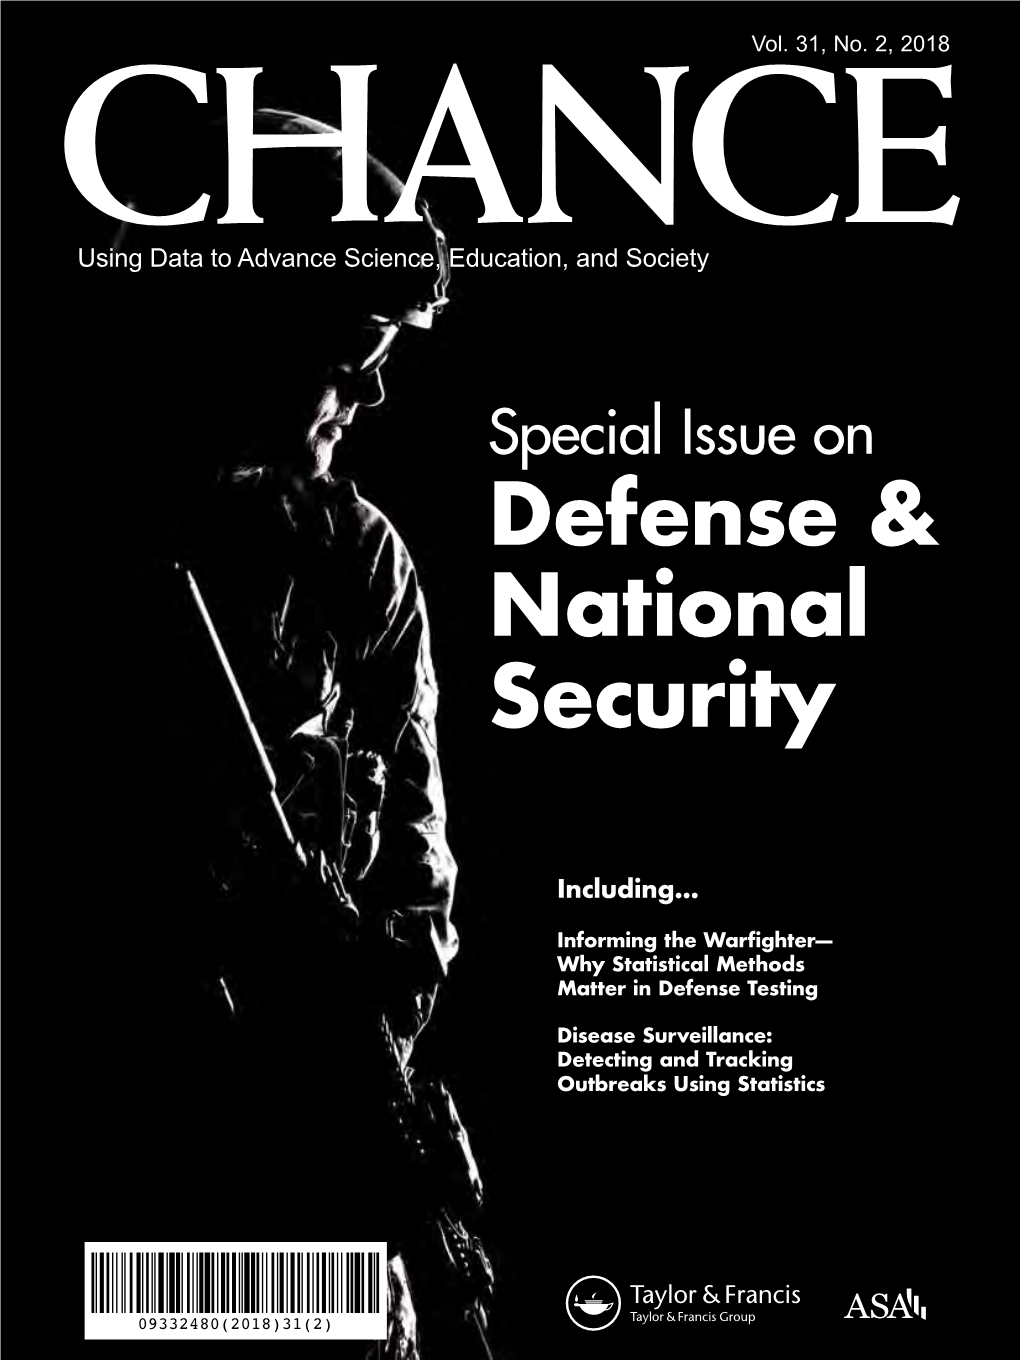 Defense & National Security